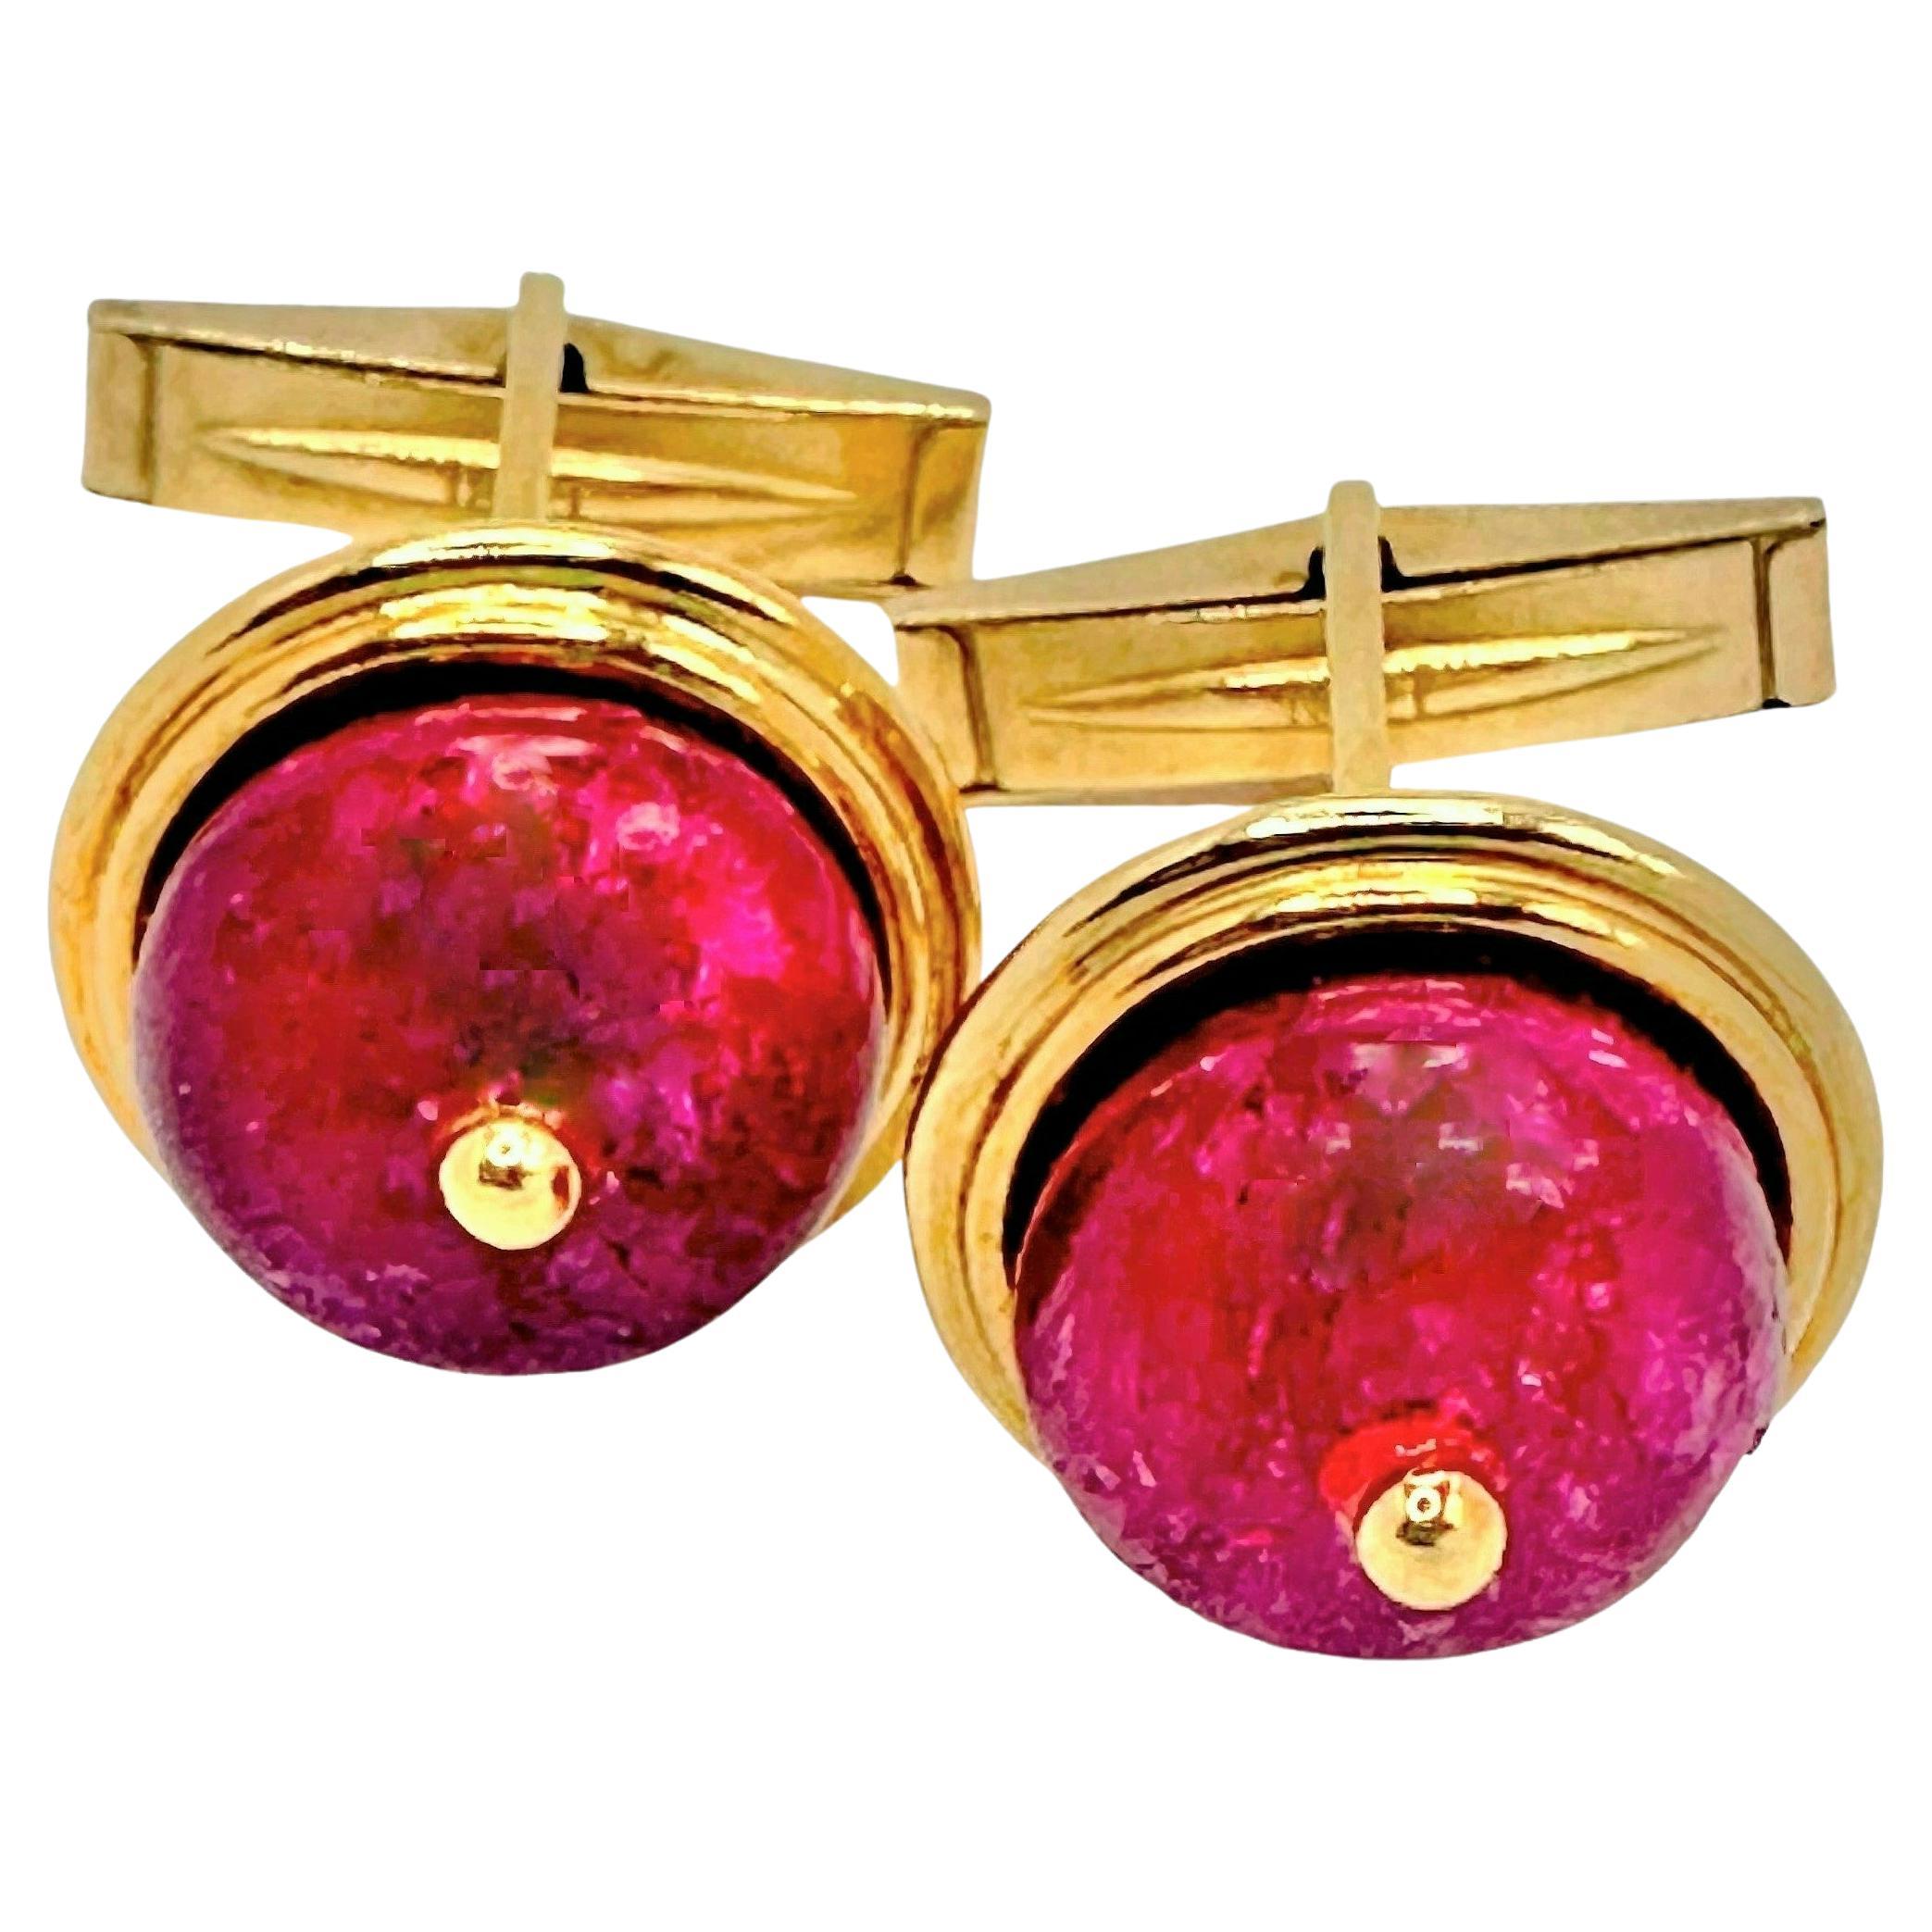 Vintage Emis Beros Gold Cuff Links with Vivid Ruby Bead Centers For Sale